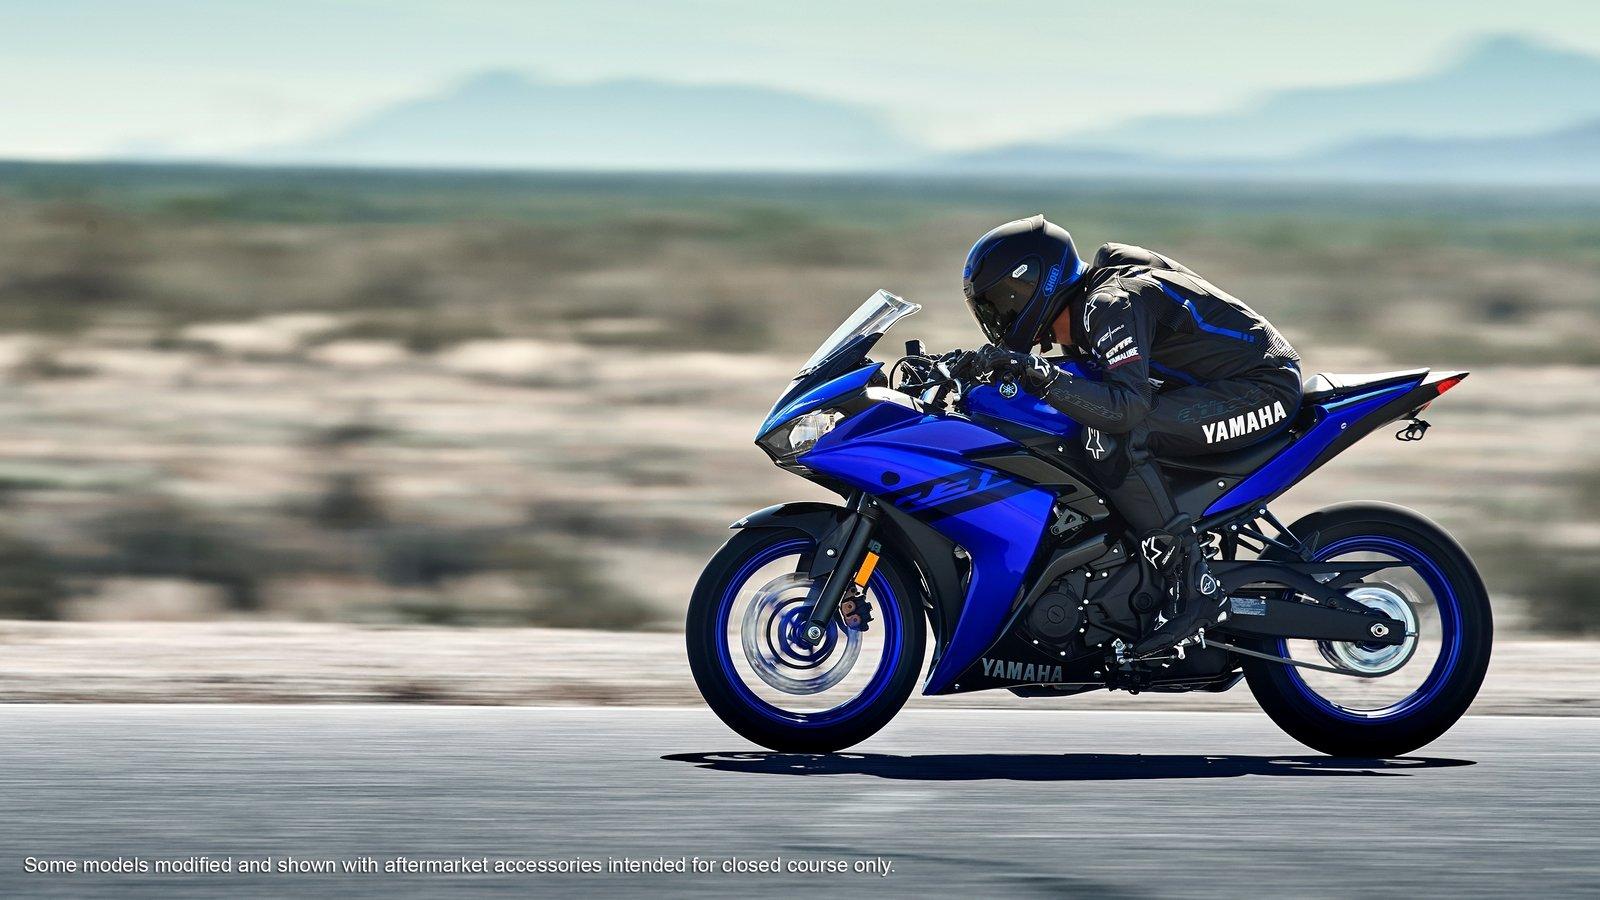 2018 Yamaha YZF R3 Picture, Photo, Wallpaper